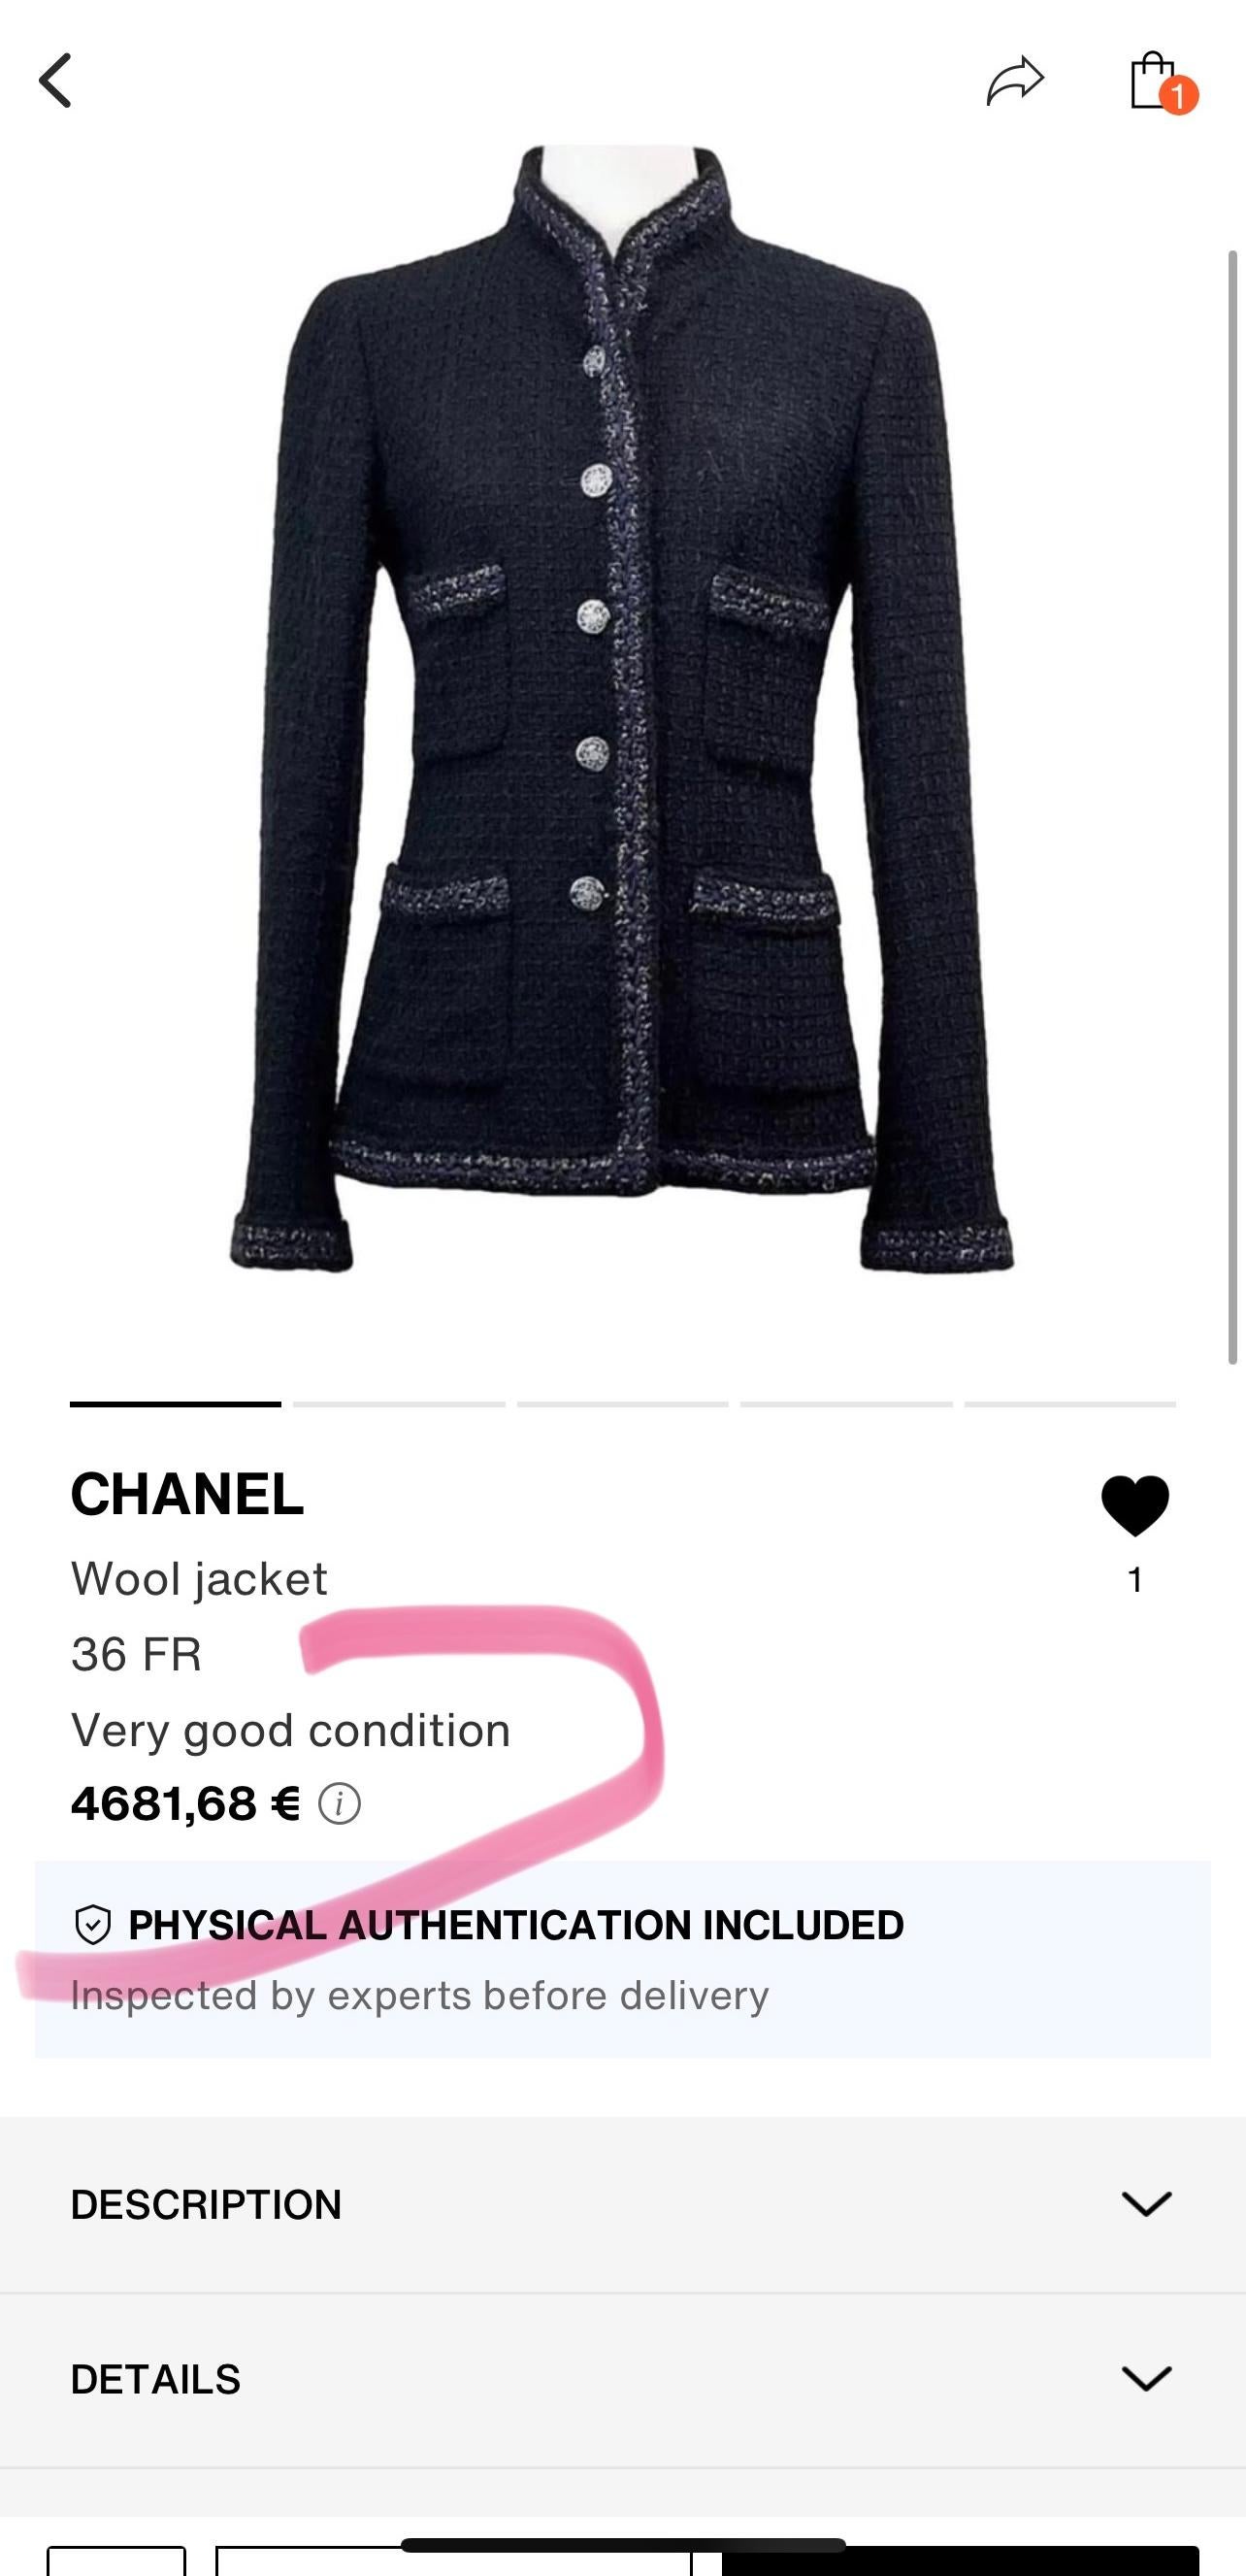 Absolutely timeless piece!
Rarest Chanel little black jacket from Ad Campaign of Paris / SHANGHAI Collection, Metiers d'Art
- CC logo antique 'coin' buttons
- signature metallic braided trim
- black silk lining, chain link at hem
Size mark 34 FR.